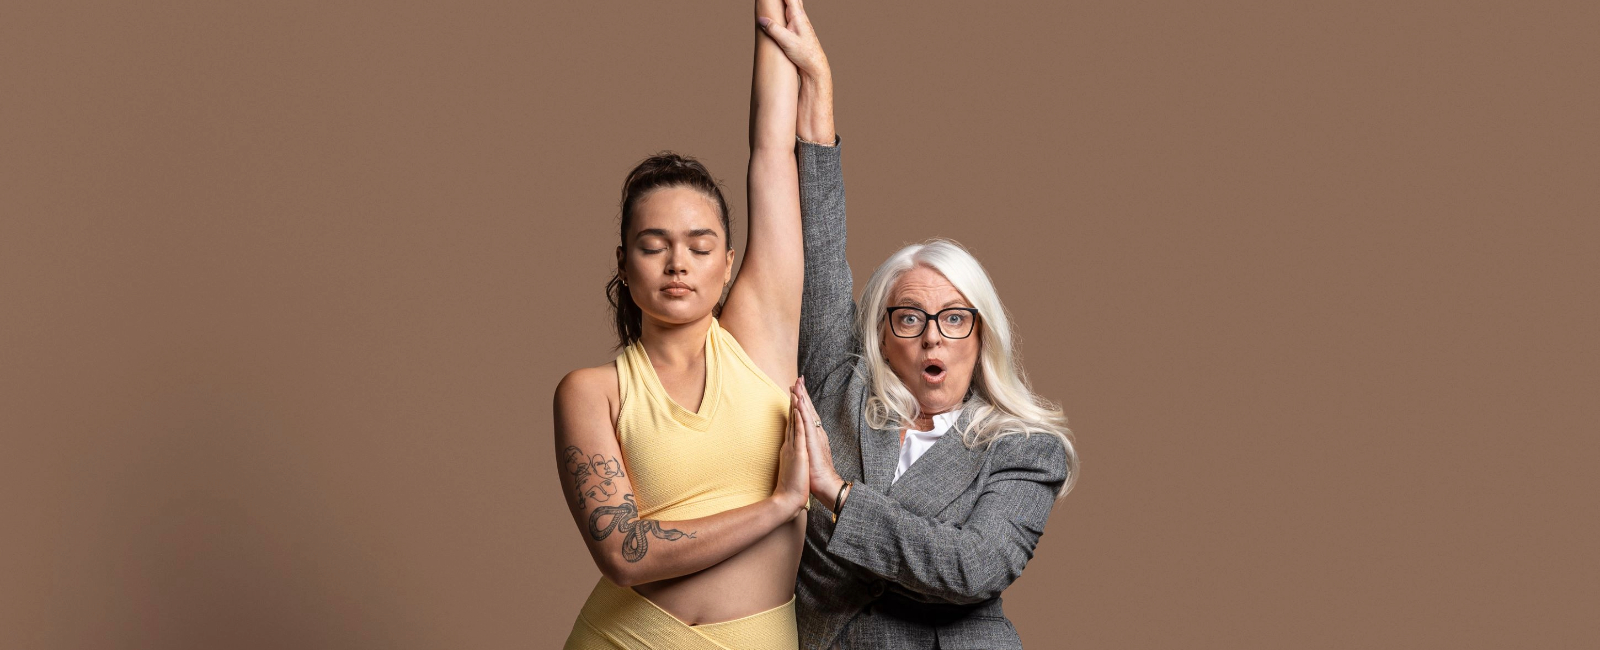 A person in workout attire and a person in a suit doing a yoga pose